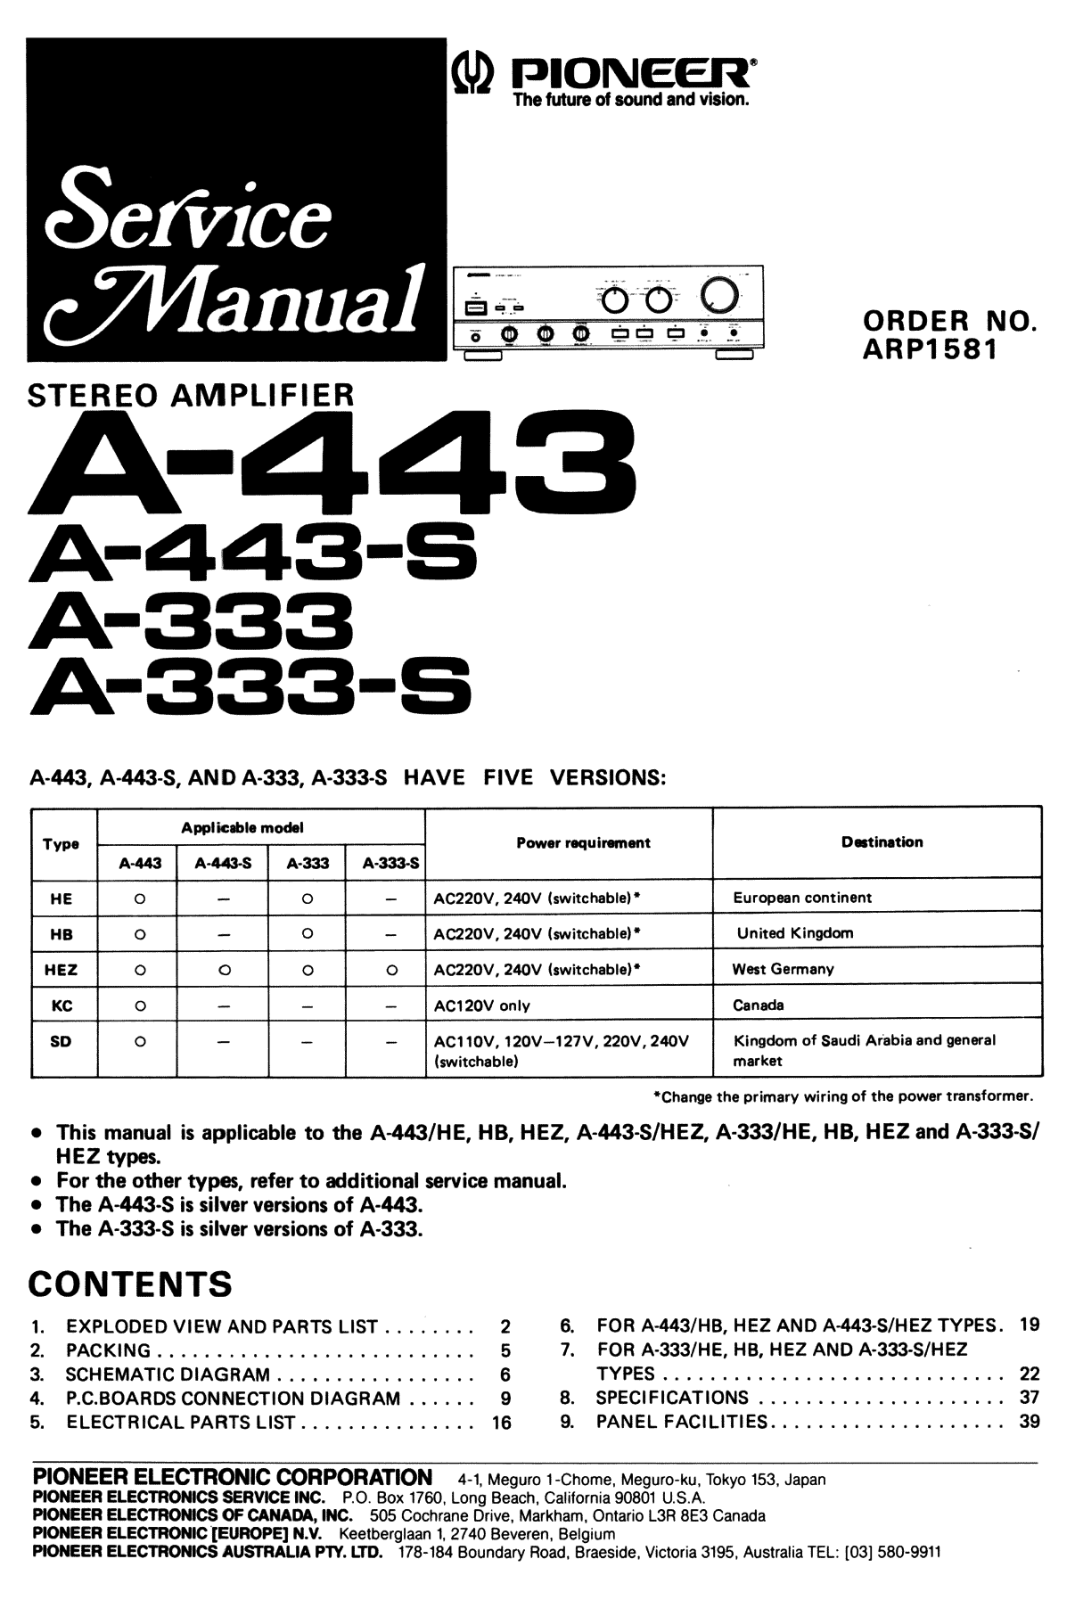 Pioneer A-333, A-333-S, A-443, A-443-S Service manual